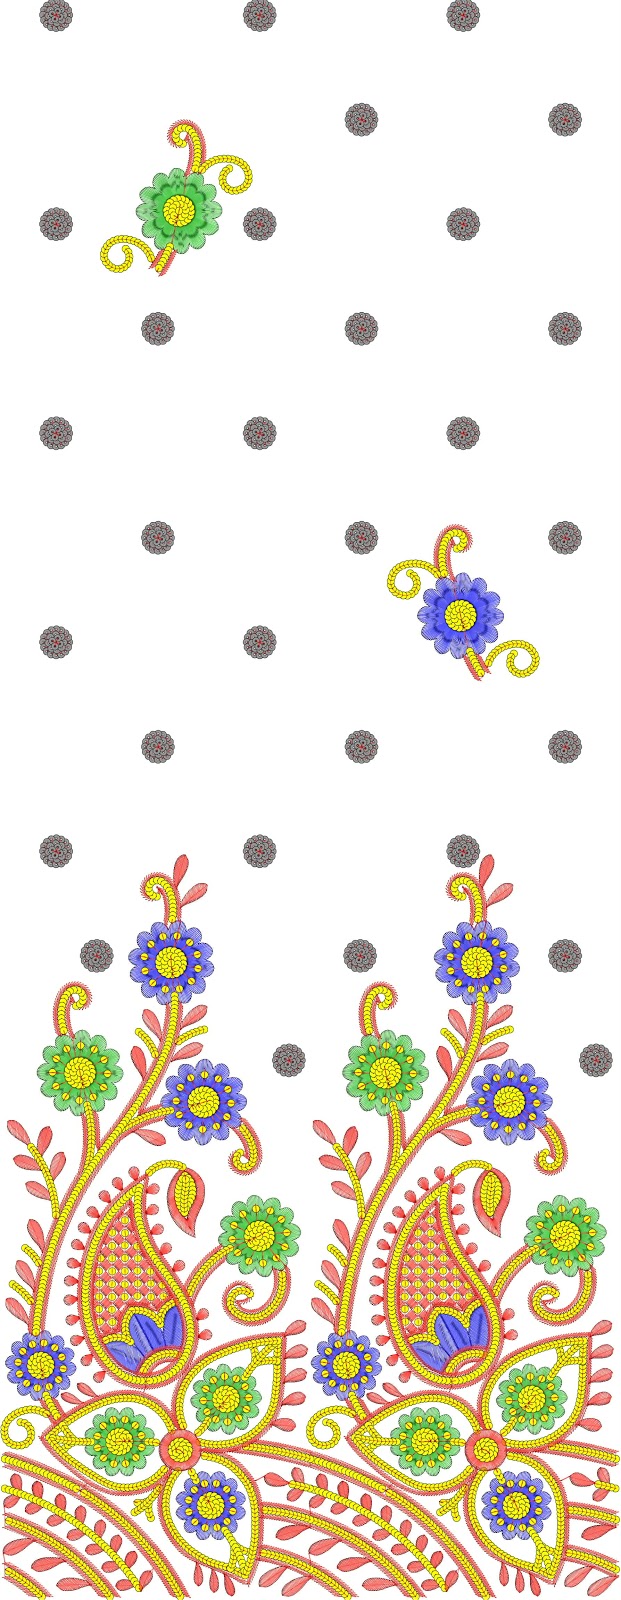 embroidery design images